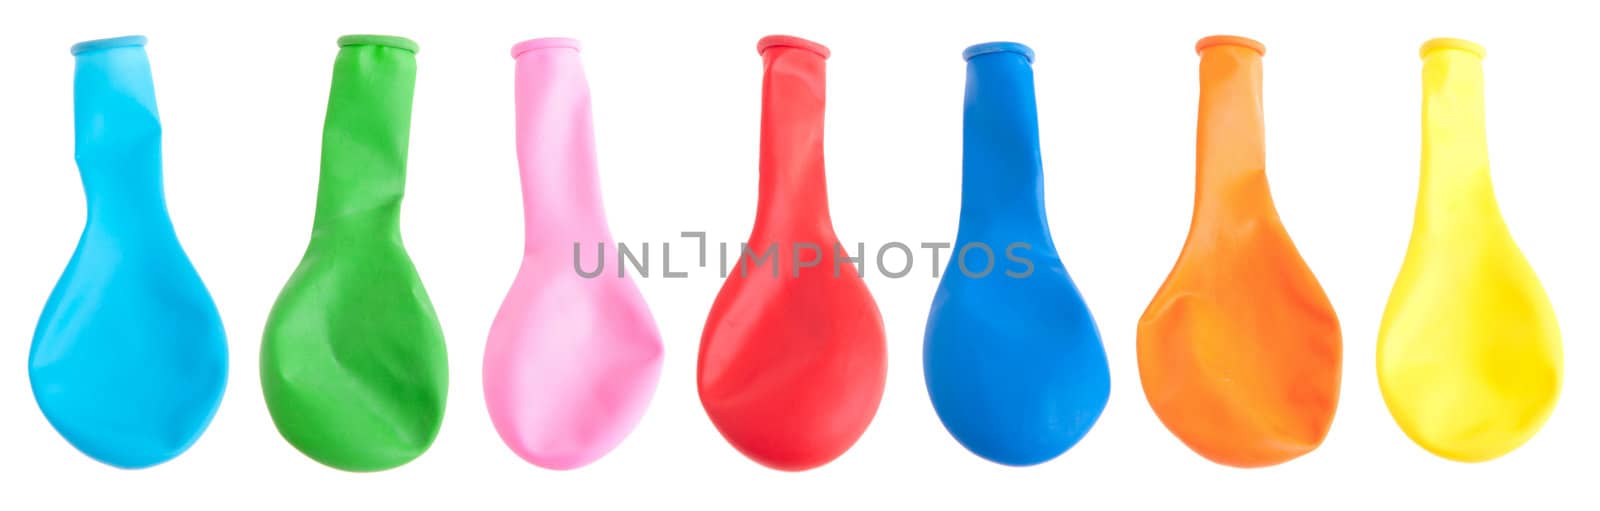 collection of inflatable flat balloons isolated on white background